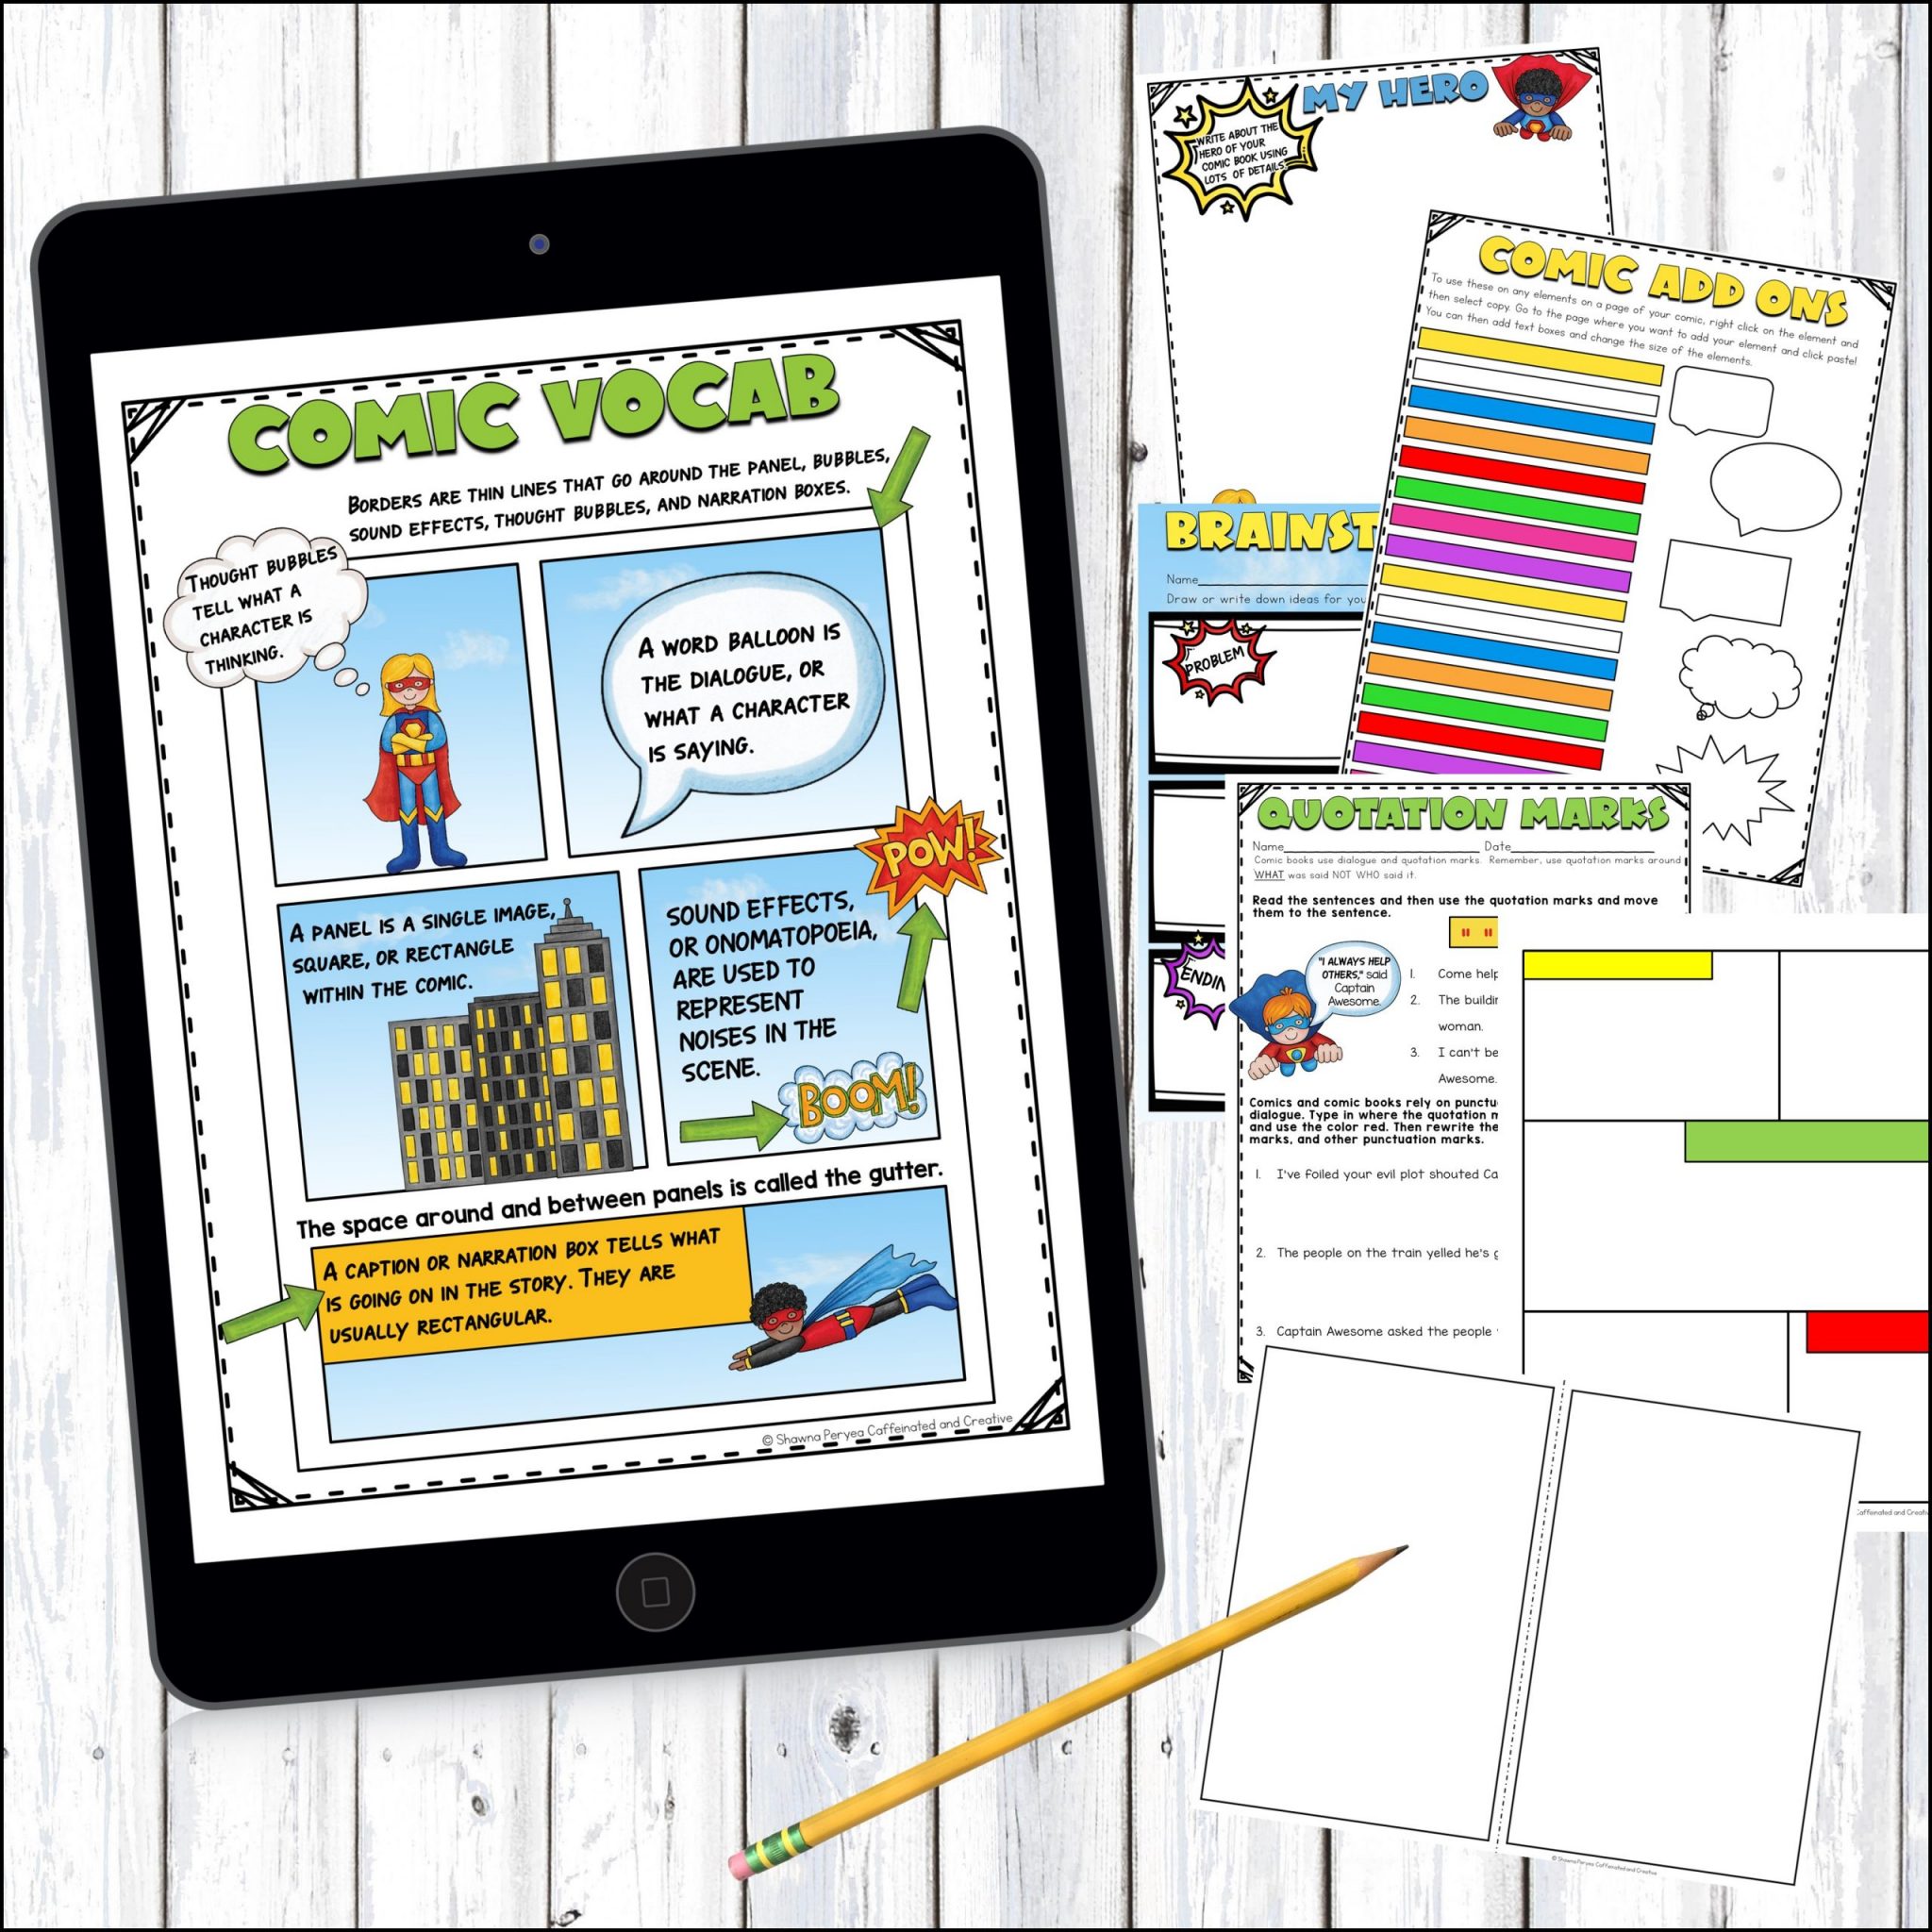 Digital and Printable comic book is a great way for teaching writing with comics!